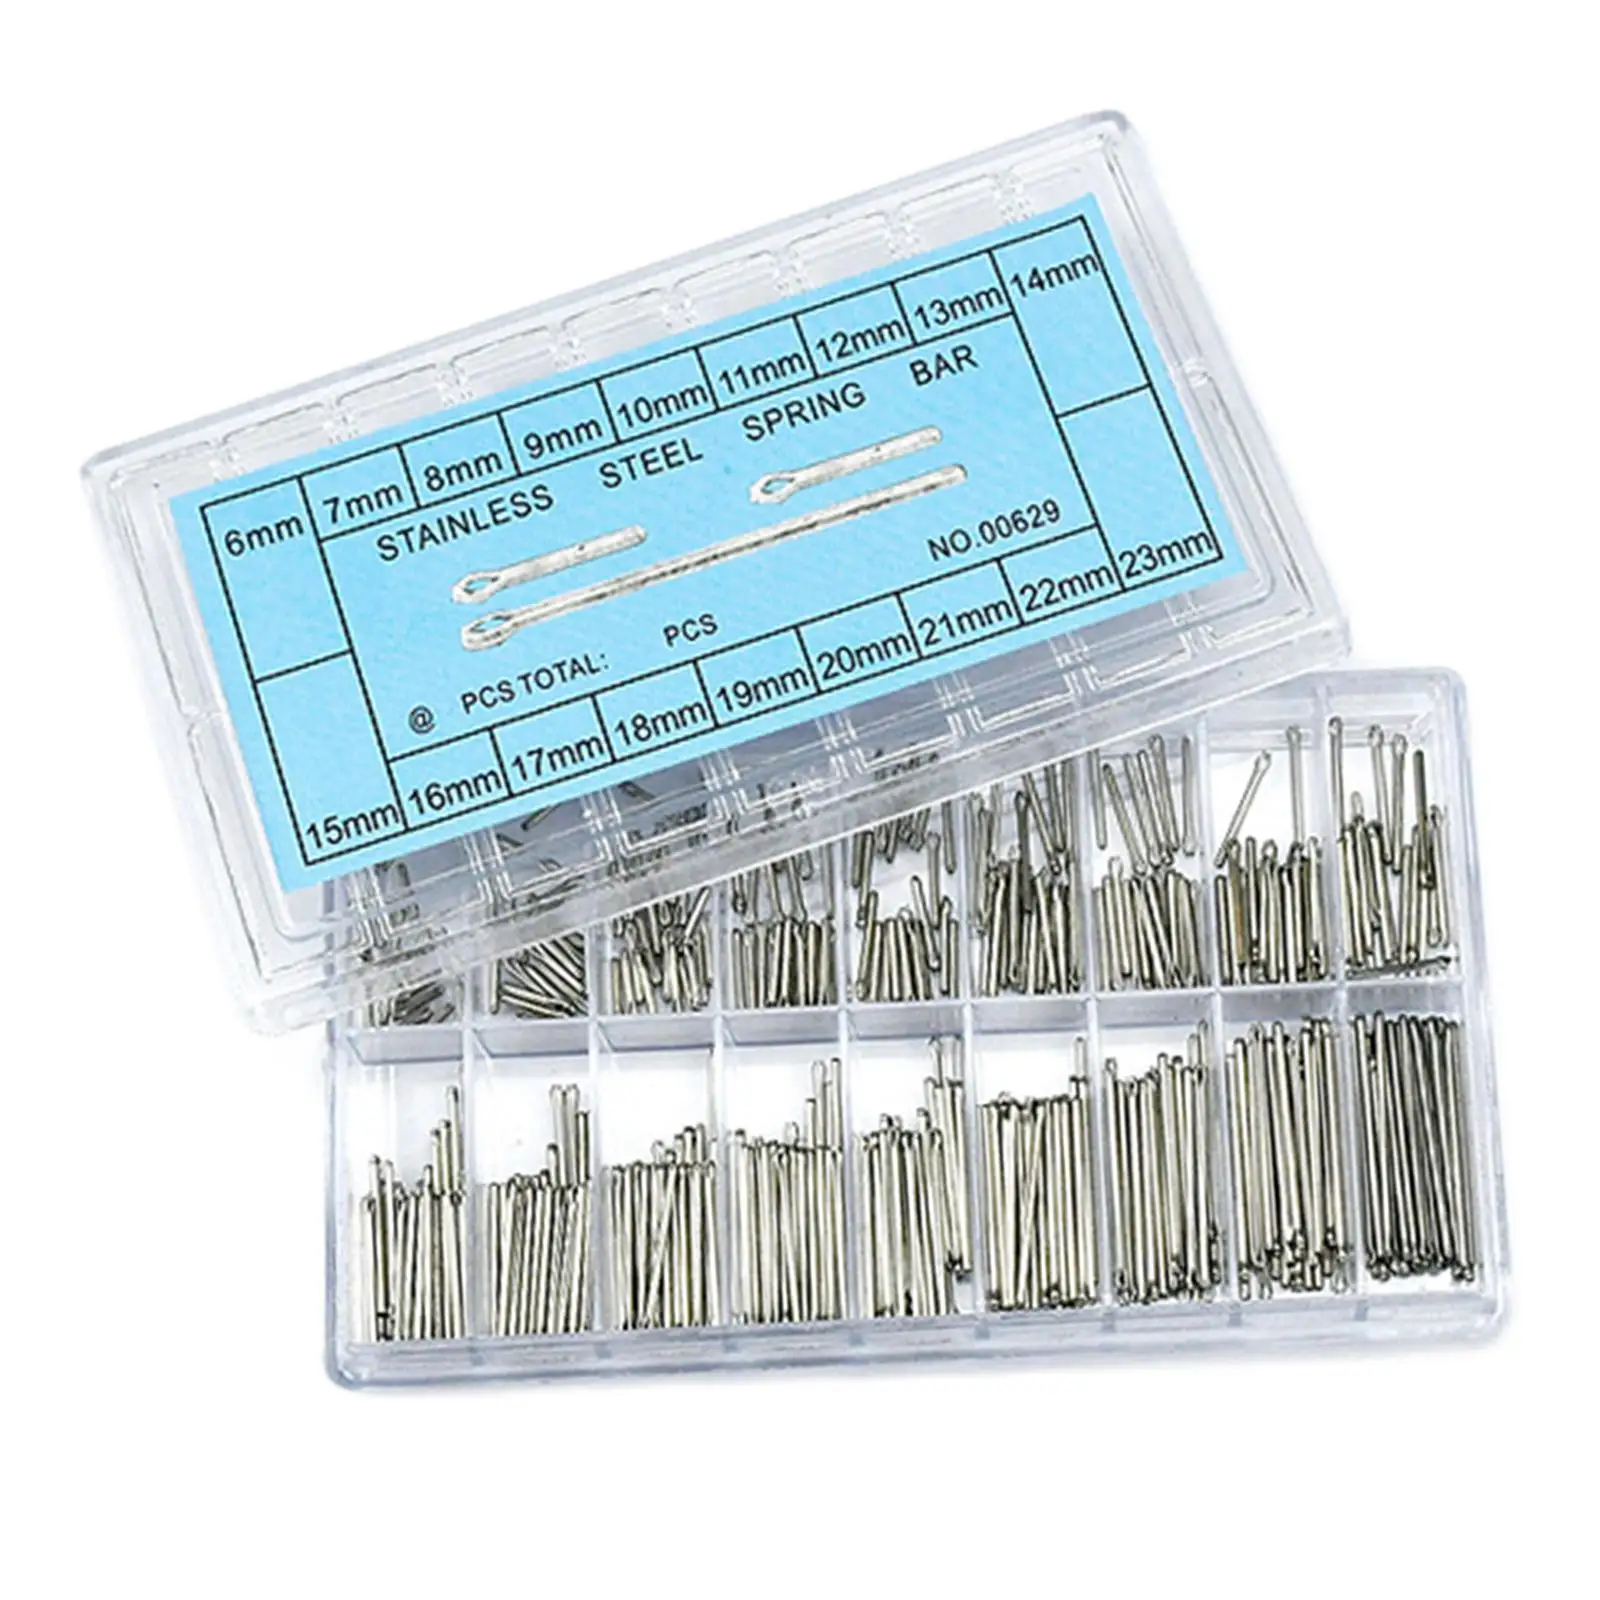 360x Metal Watch Band Link Pins 6-23mm Connect Bar Pin Strap Link Pins Repair Kit Organized in A Box Replacement Straight Pin